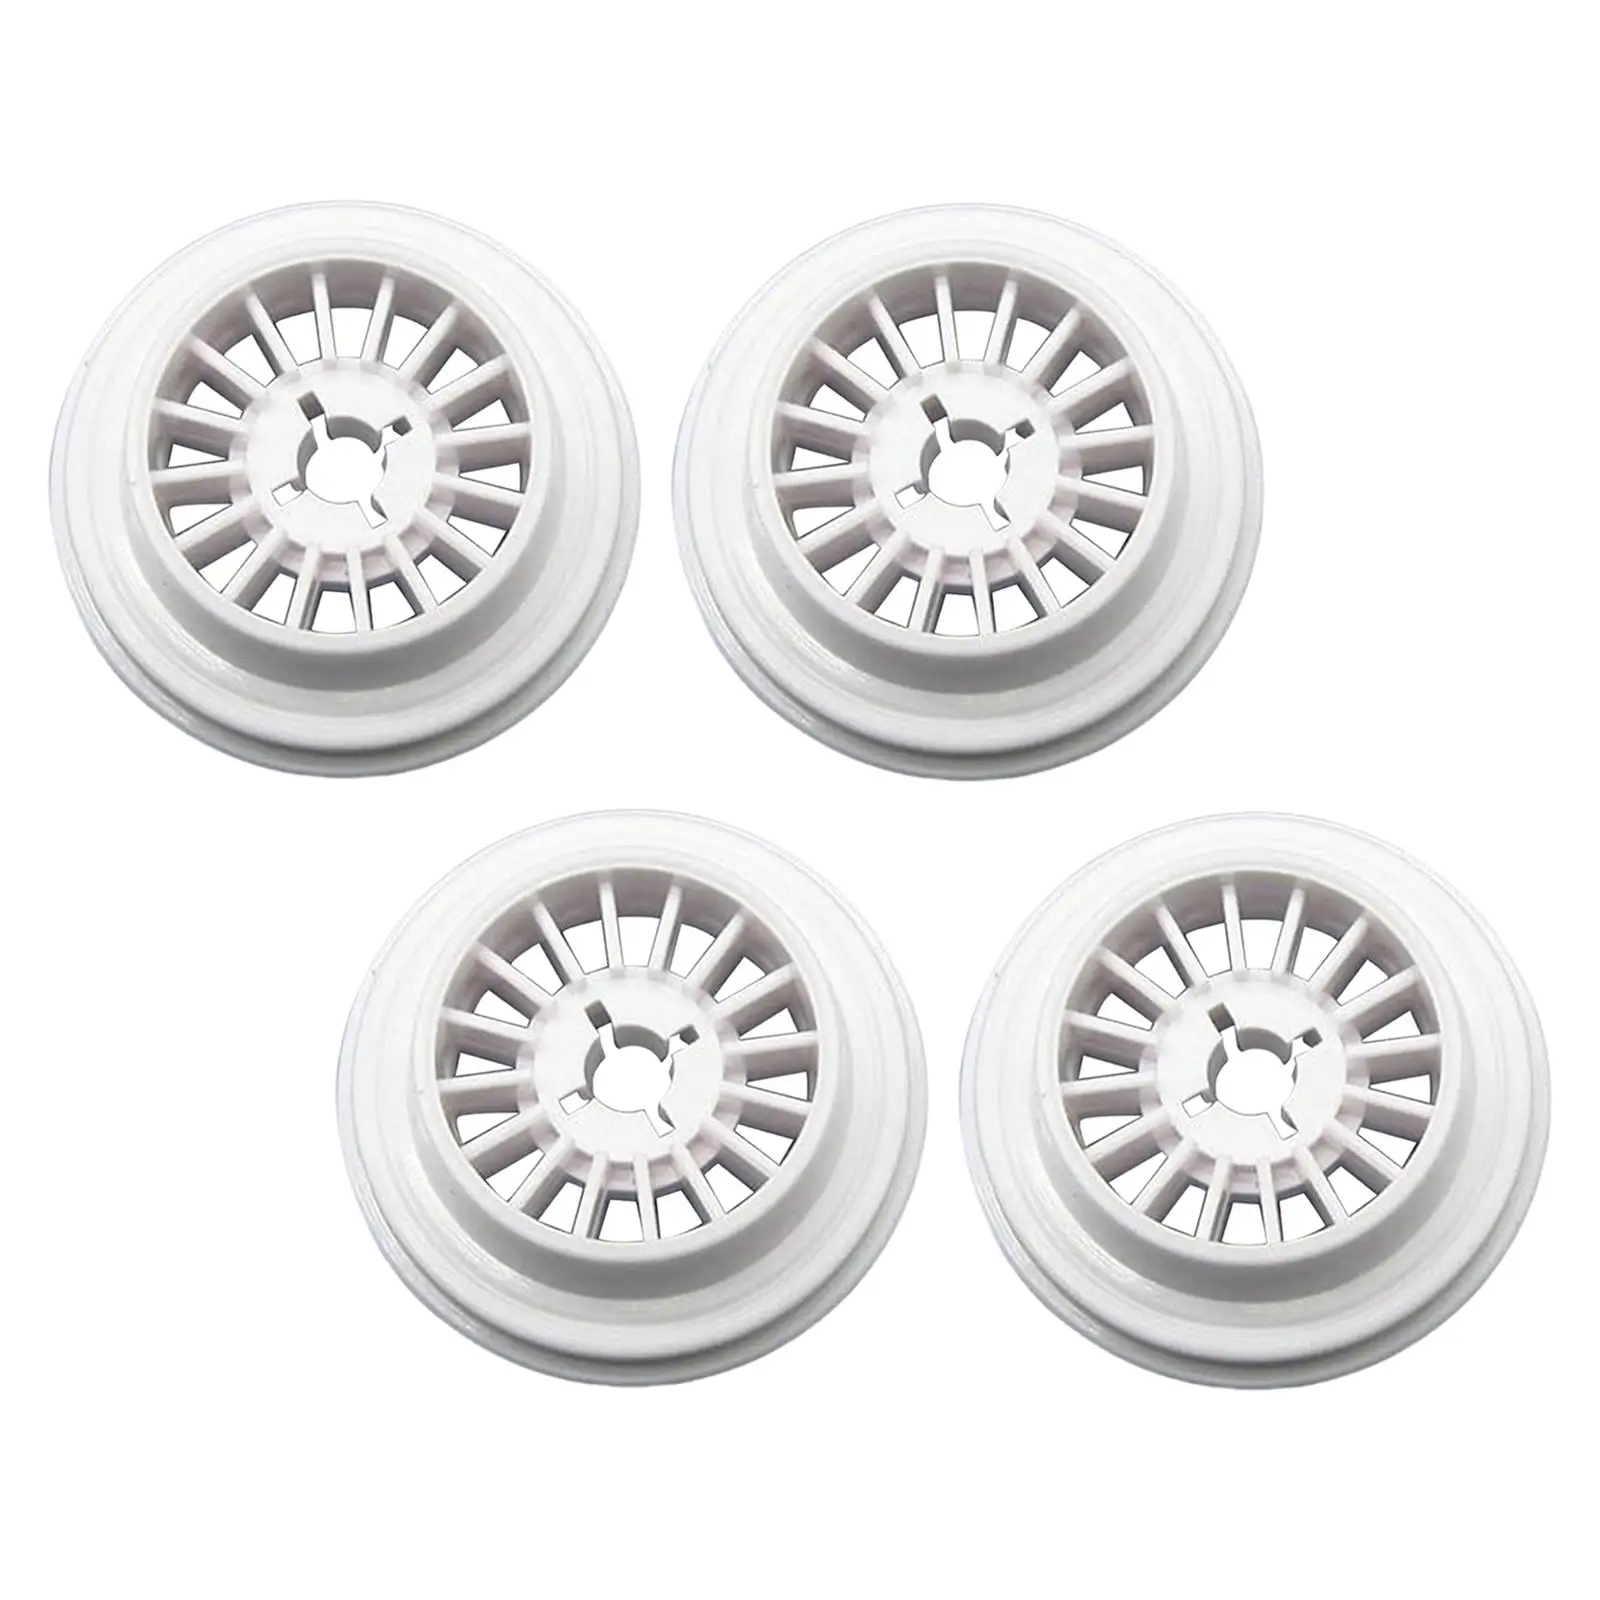 Double Accessories Spool Pin Cap 4 Pcs Sewing Spool Cap for Singer Sewing Machine 4000 5000 6000 9000